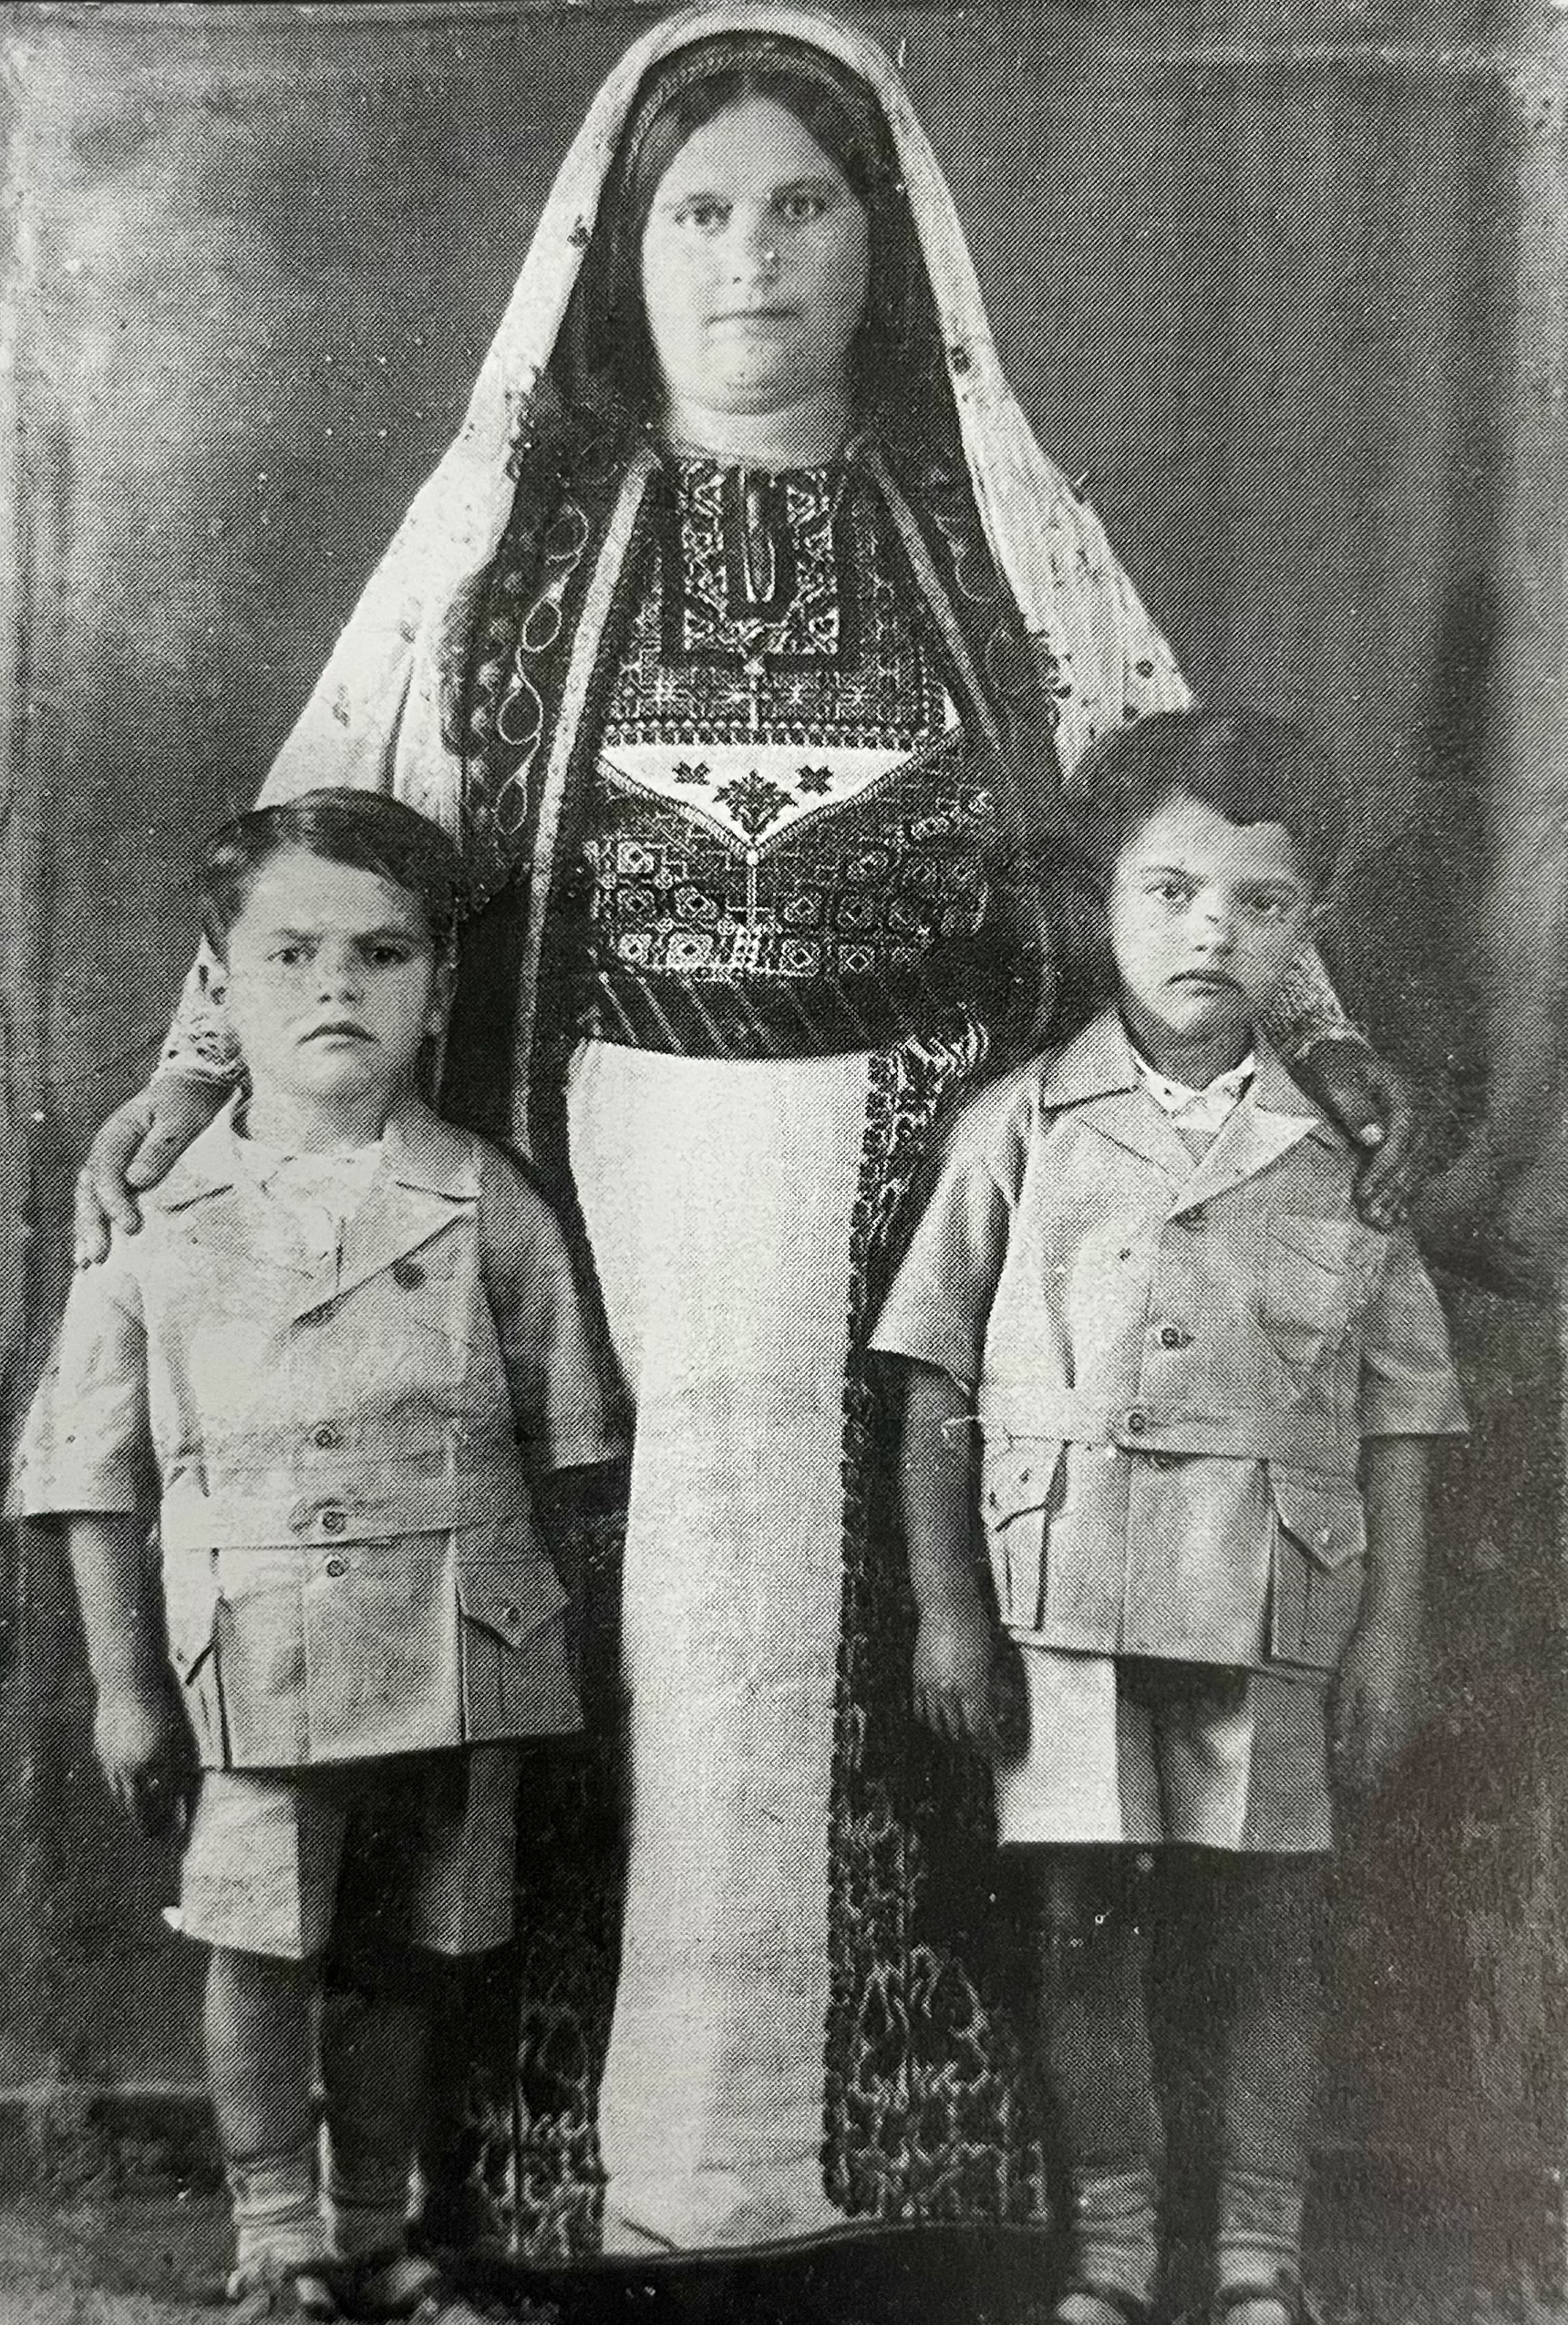 A black and white photo of a person dressed in traditional Palestinian embroidered garment with fabric over her head. She has two young children standing next to her.